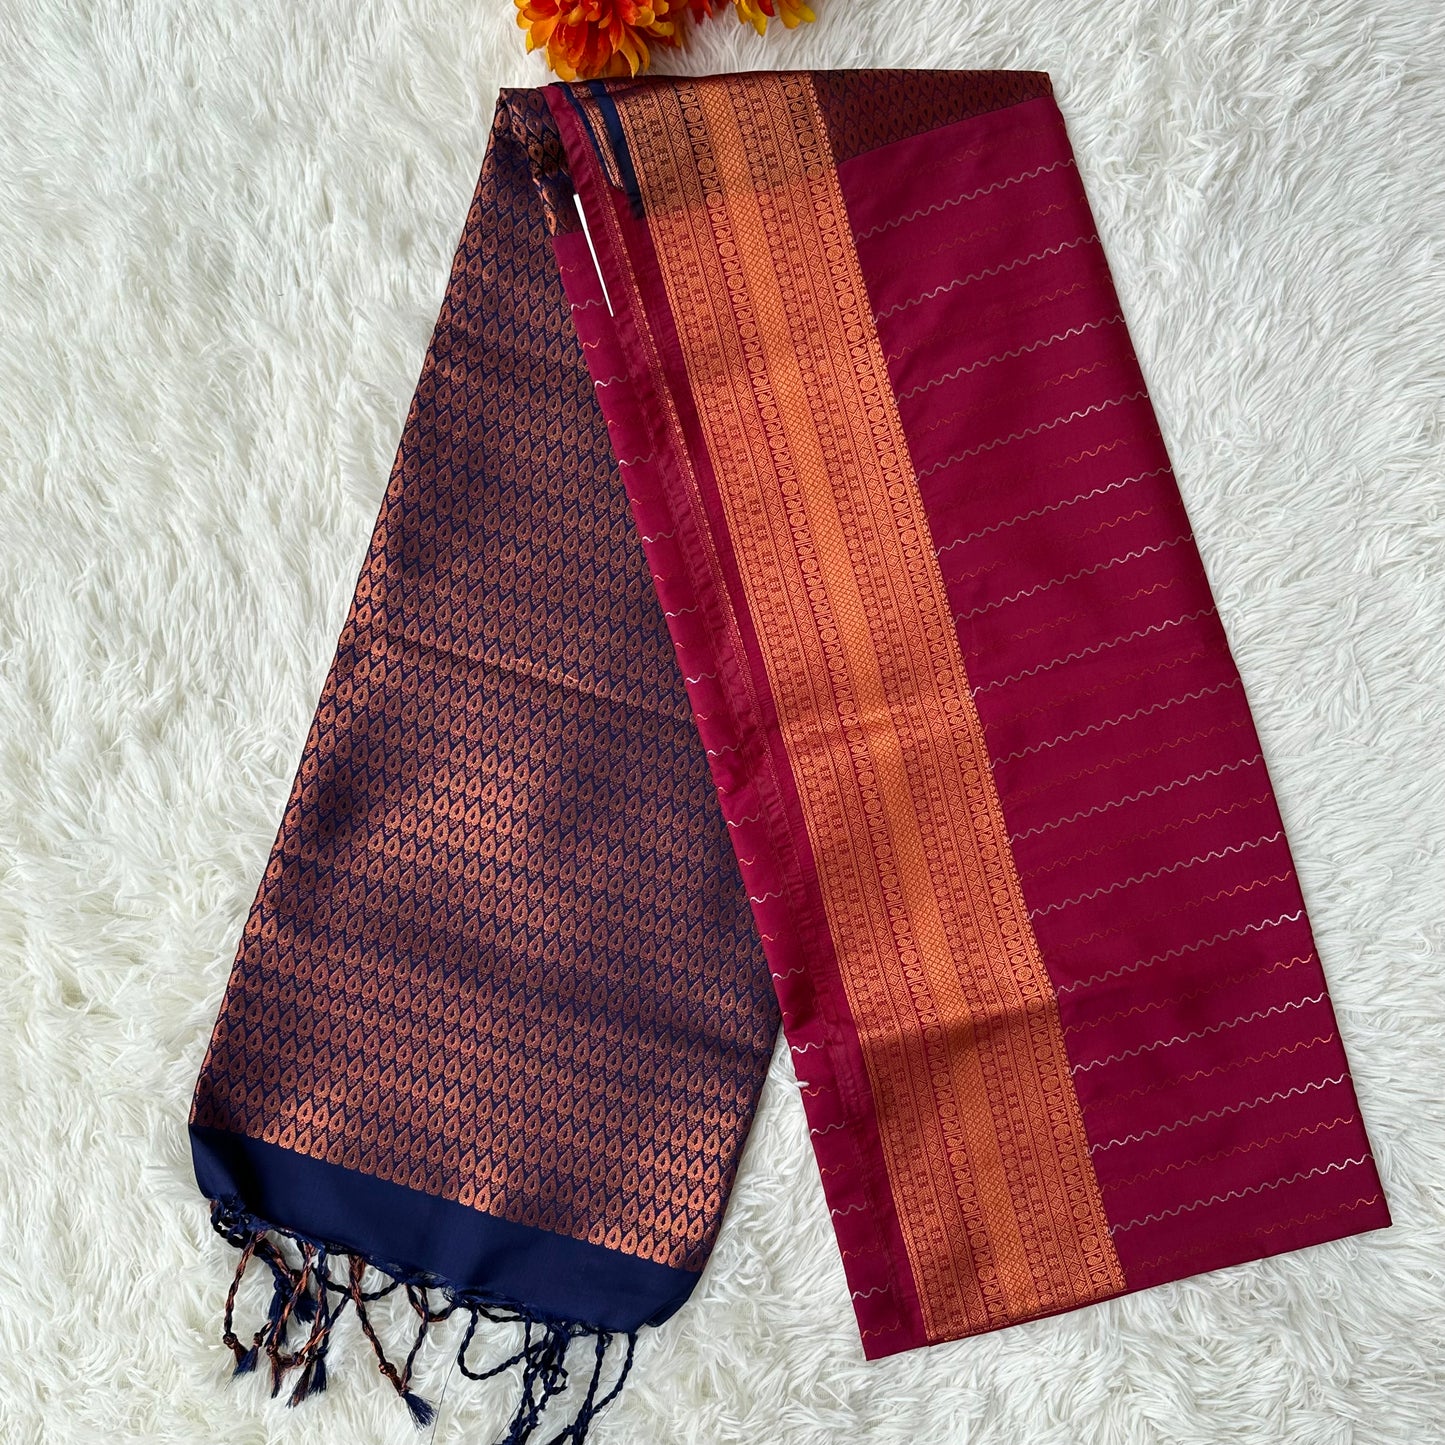 Indulge in Luxury: Maroon With Blue Soft Silk for Elegant Comfort